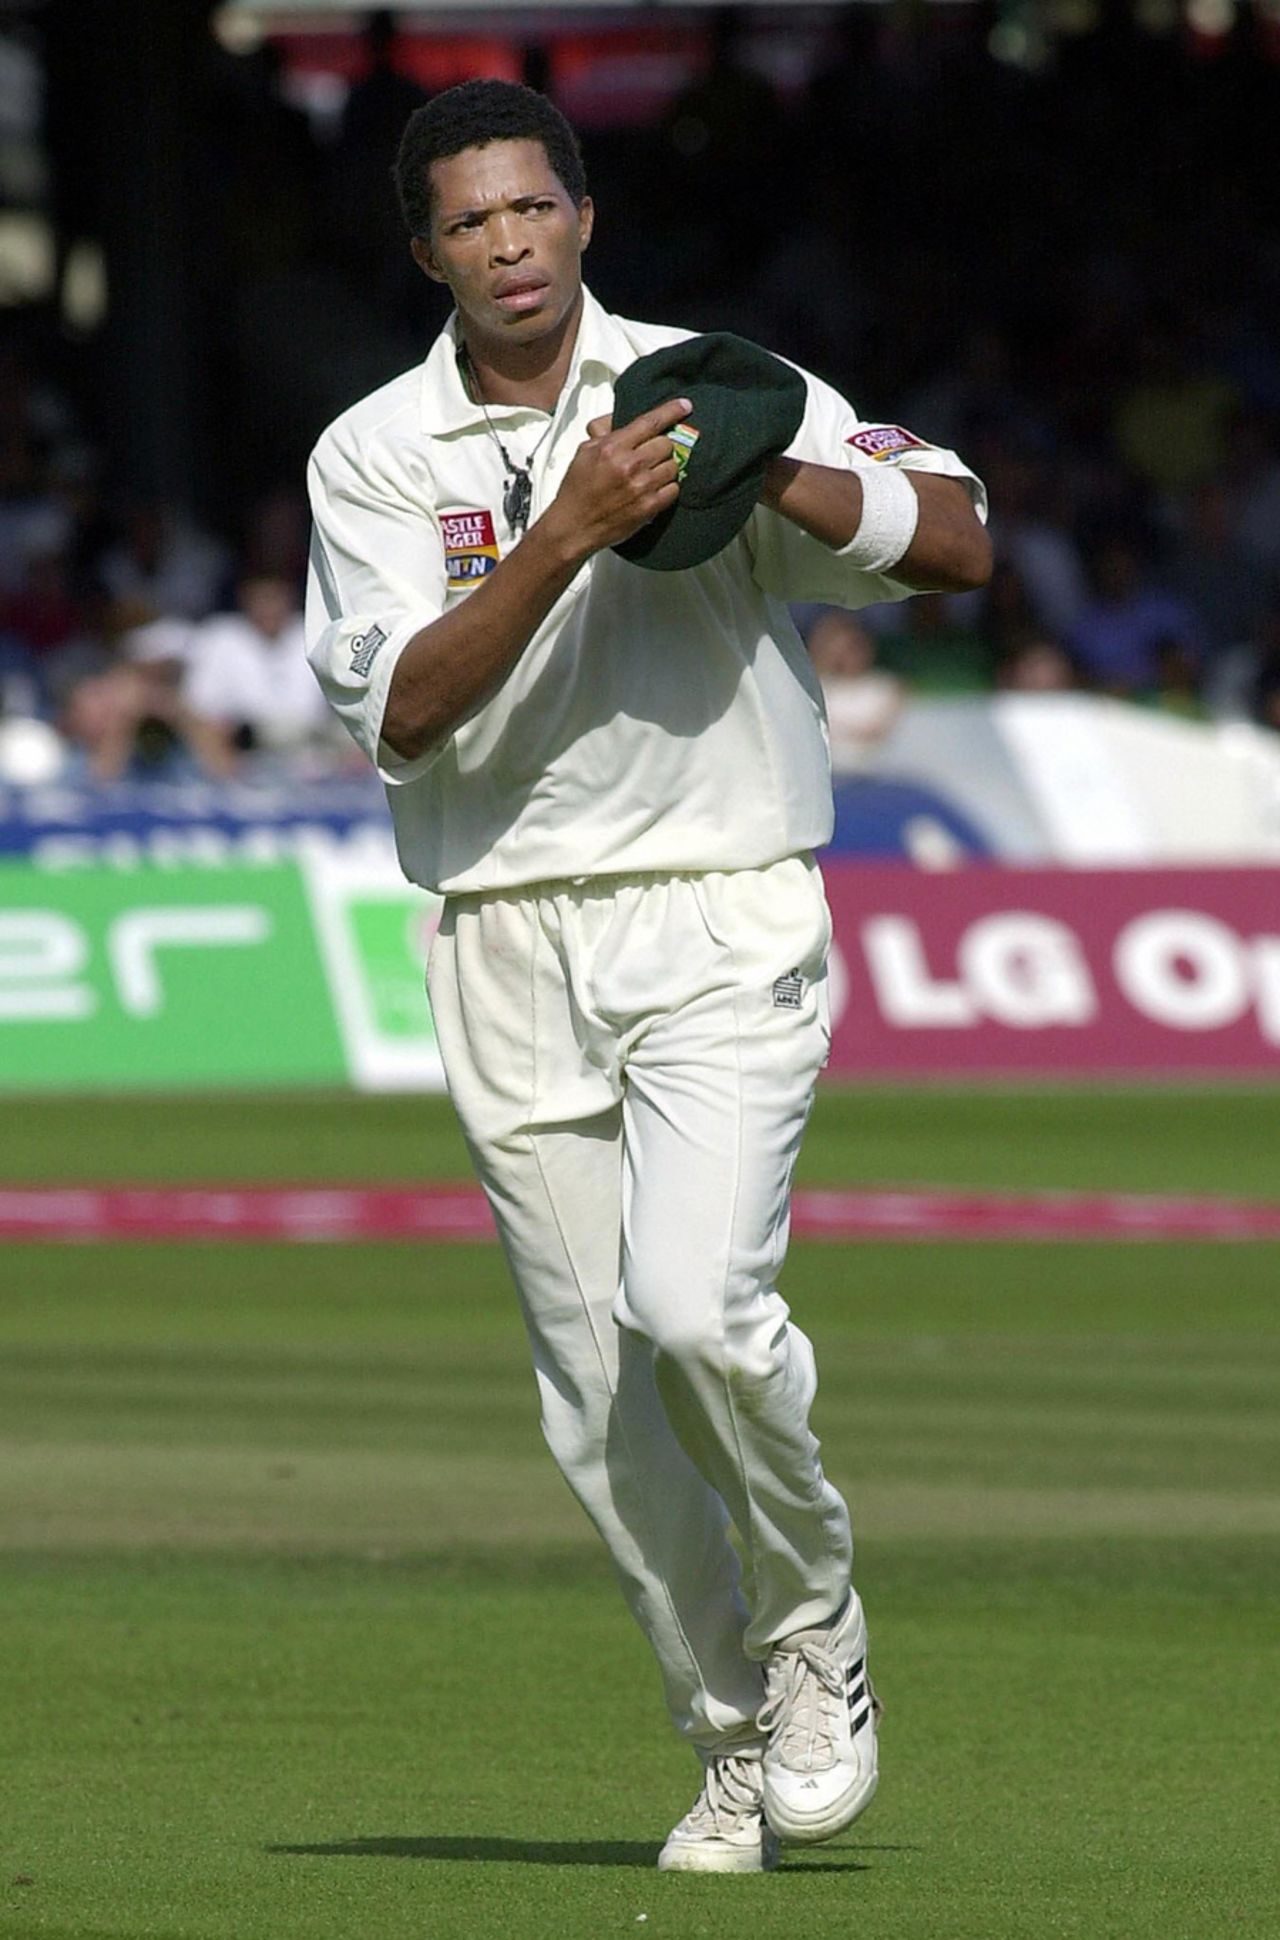 Birth of the first black man to play for South Africa England v South Africa, Lord's, 4th day, August 3, 2003